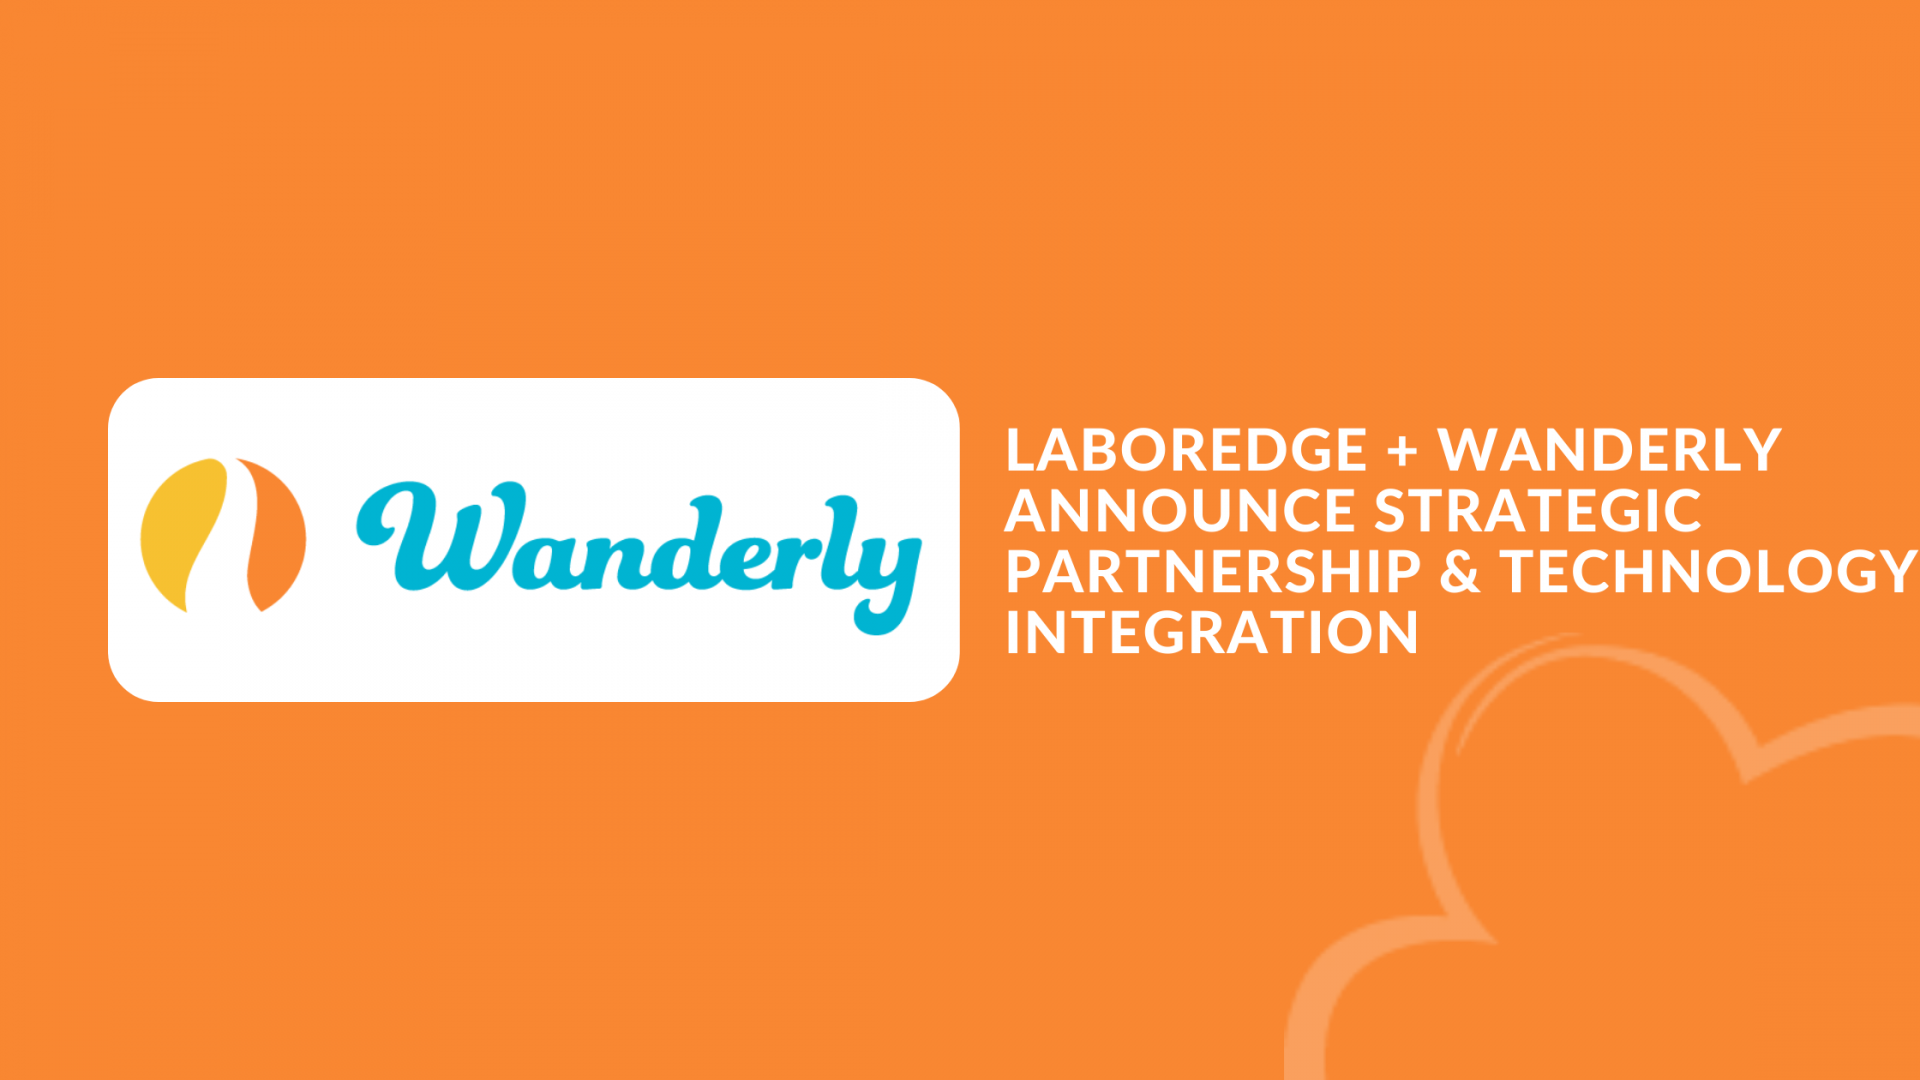 LaborEdge and Wanderly Announce Strategic Partnership and Technology Integration